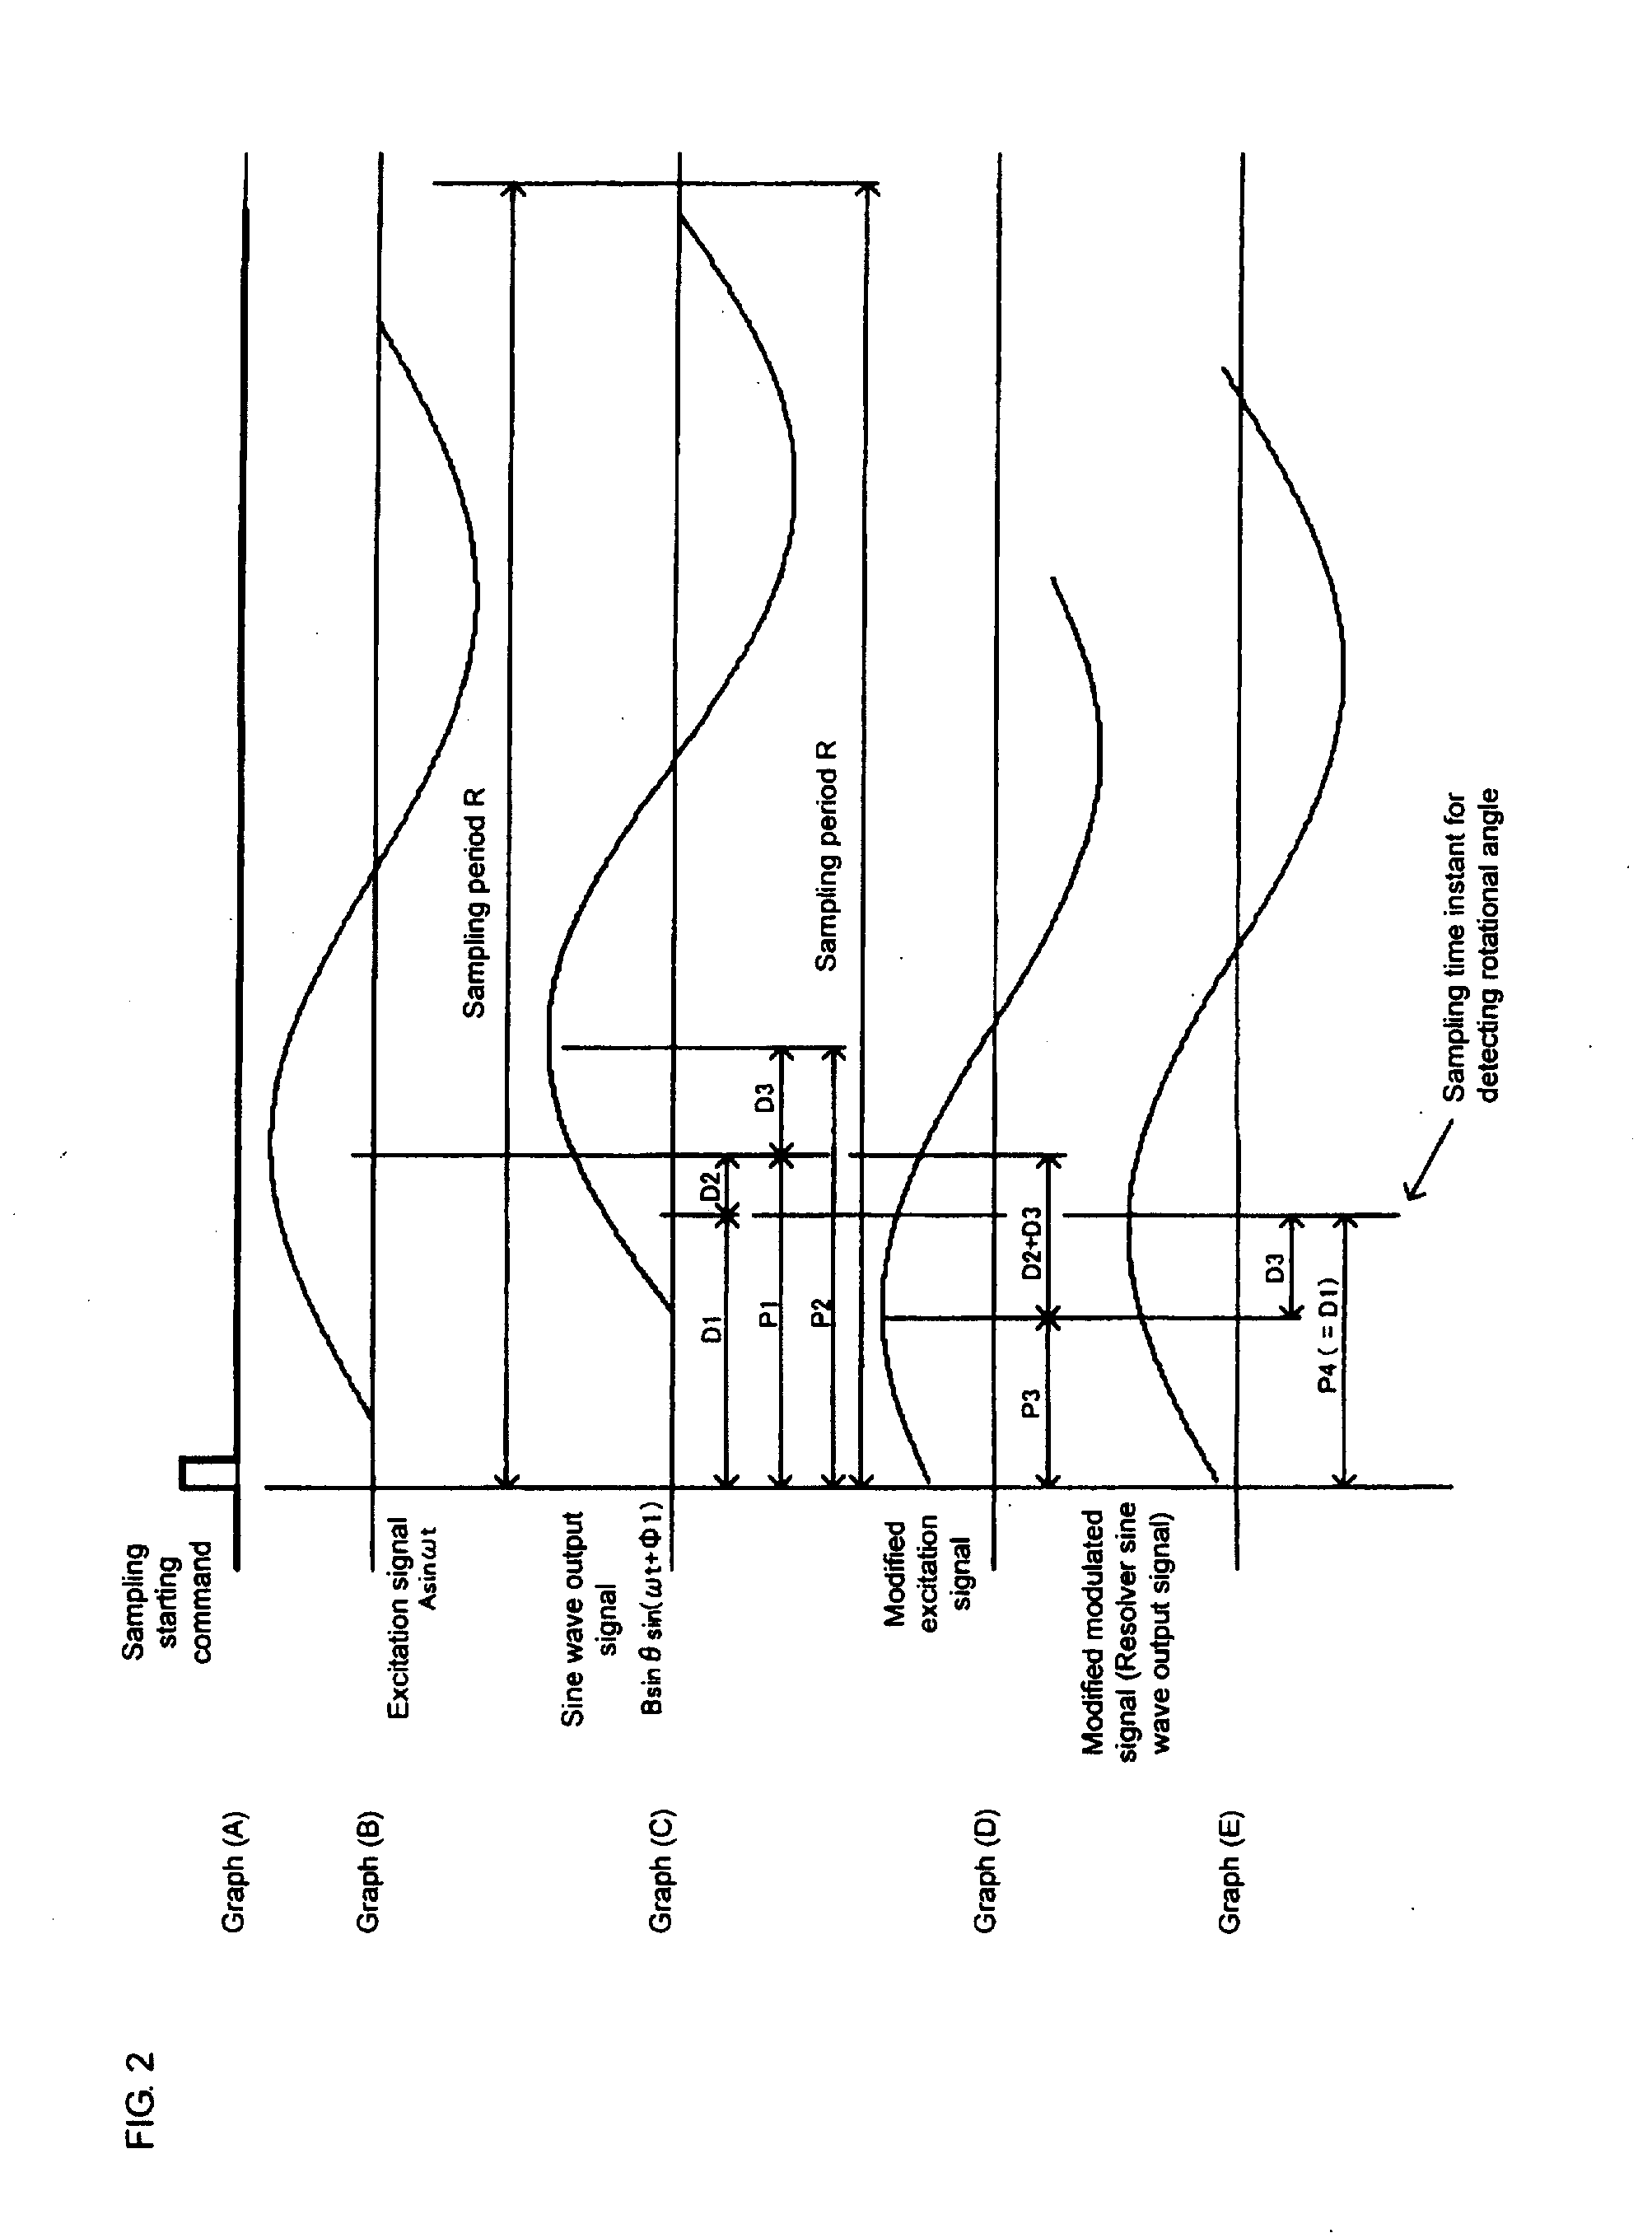 Resolver signal processing device